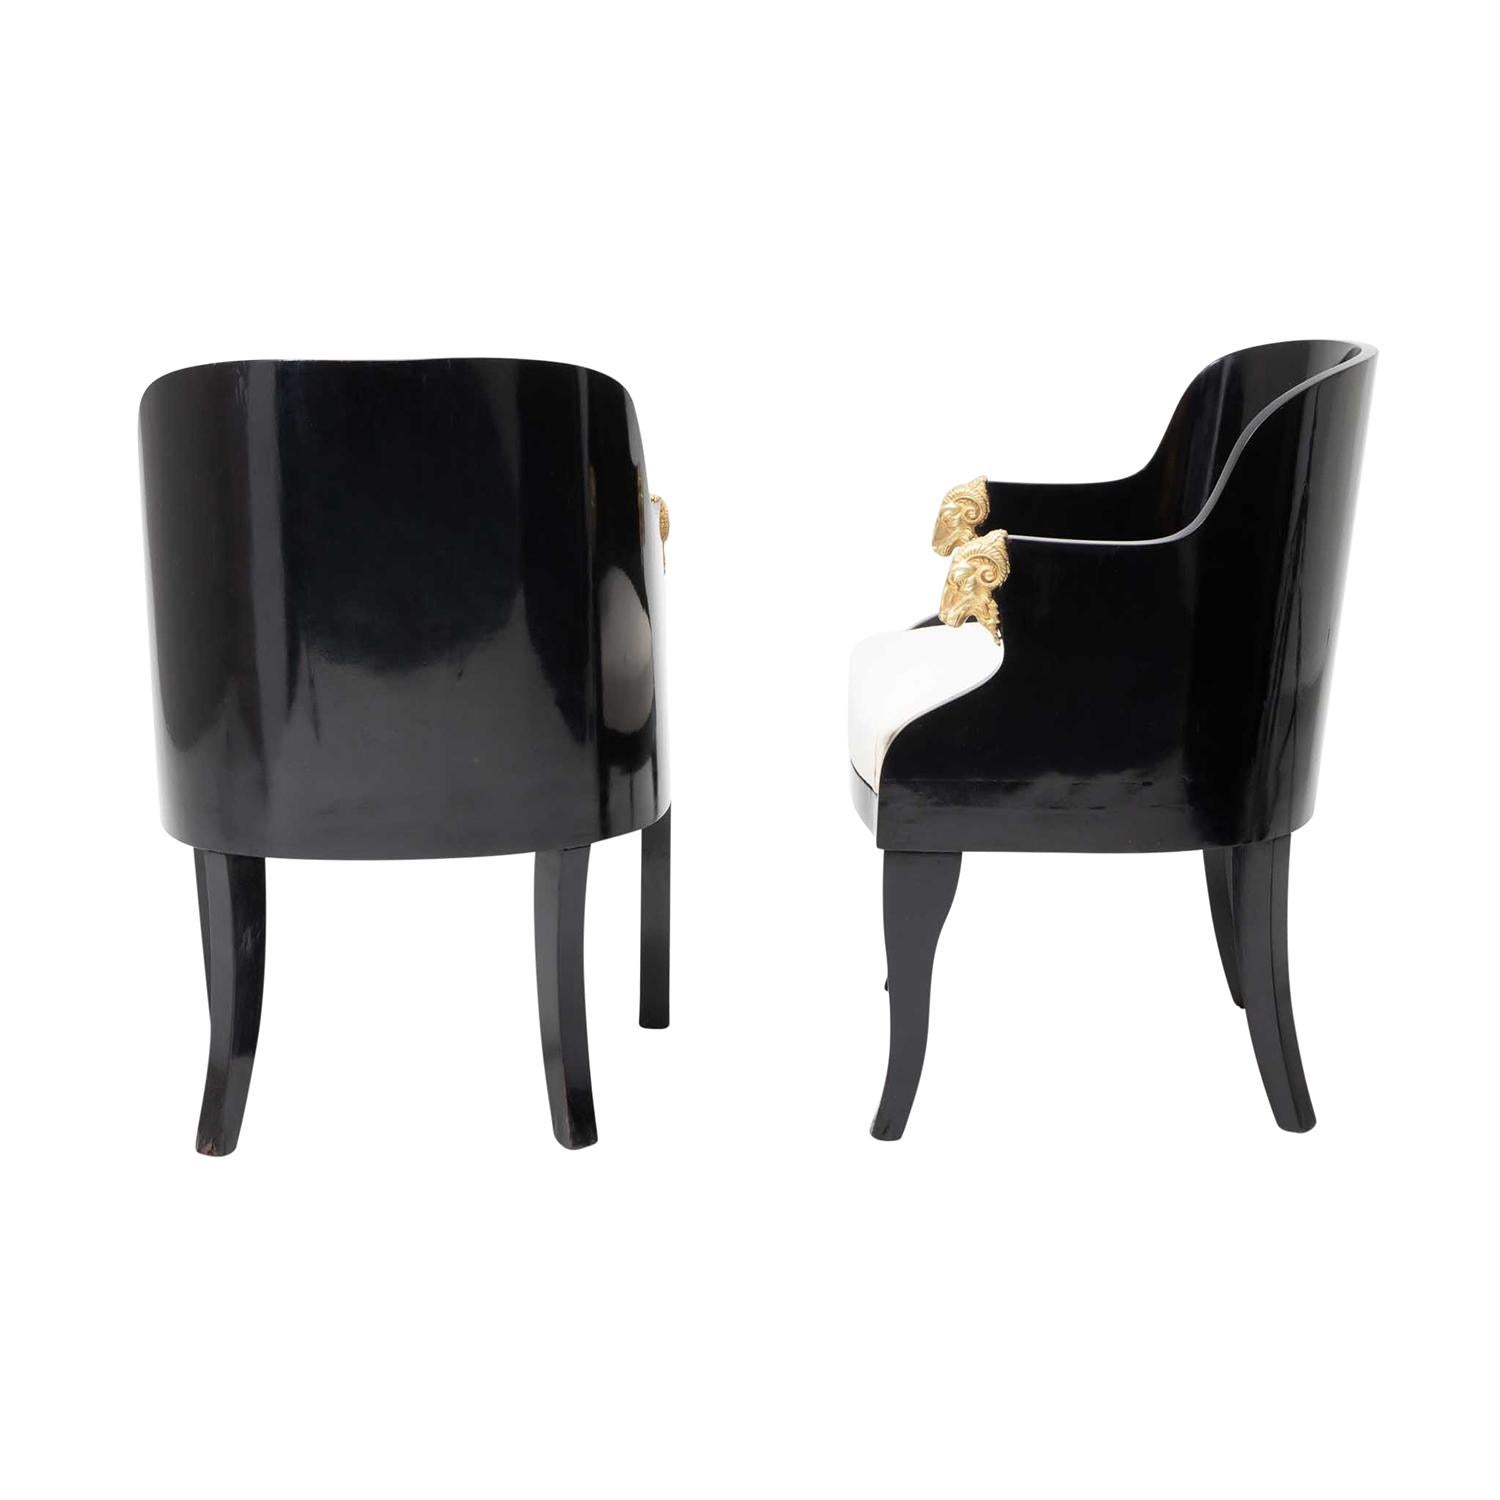 Fabric 19th Century Black Baltic Pair of Lacquered Birch Armchairs, Antique Side Chairs For Sale